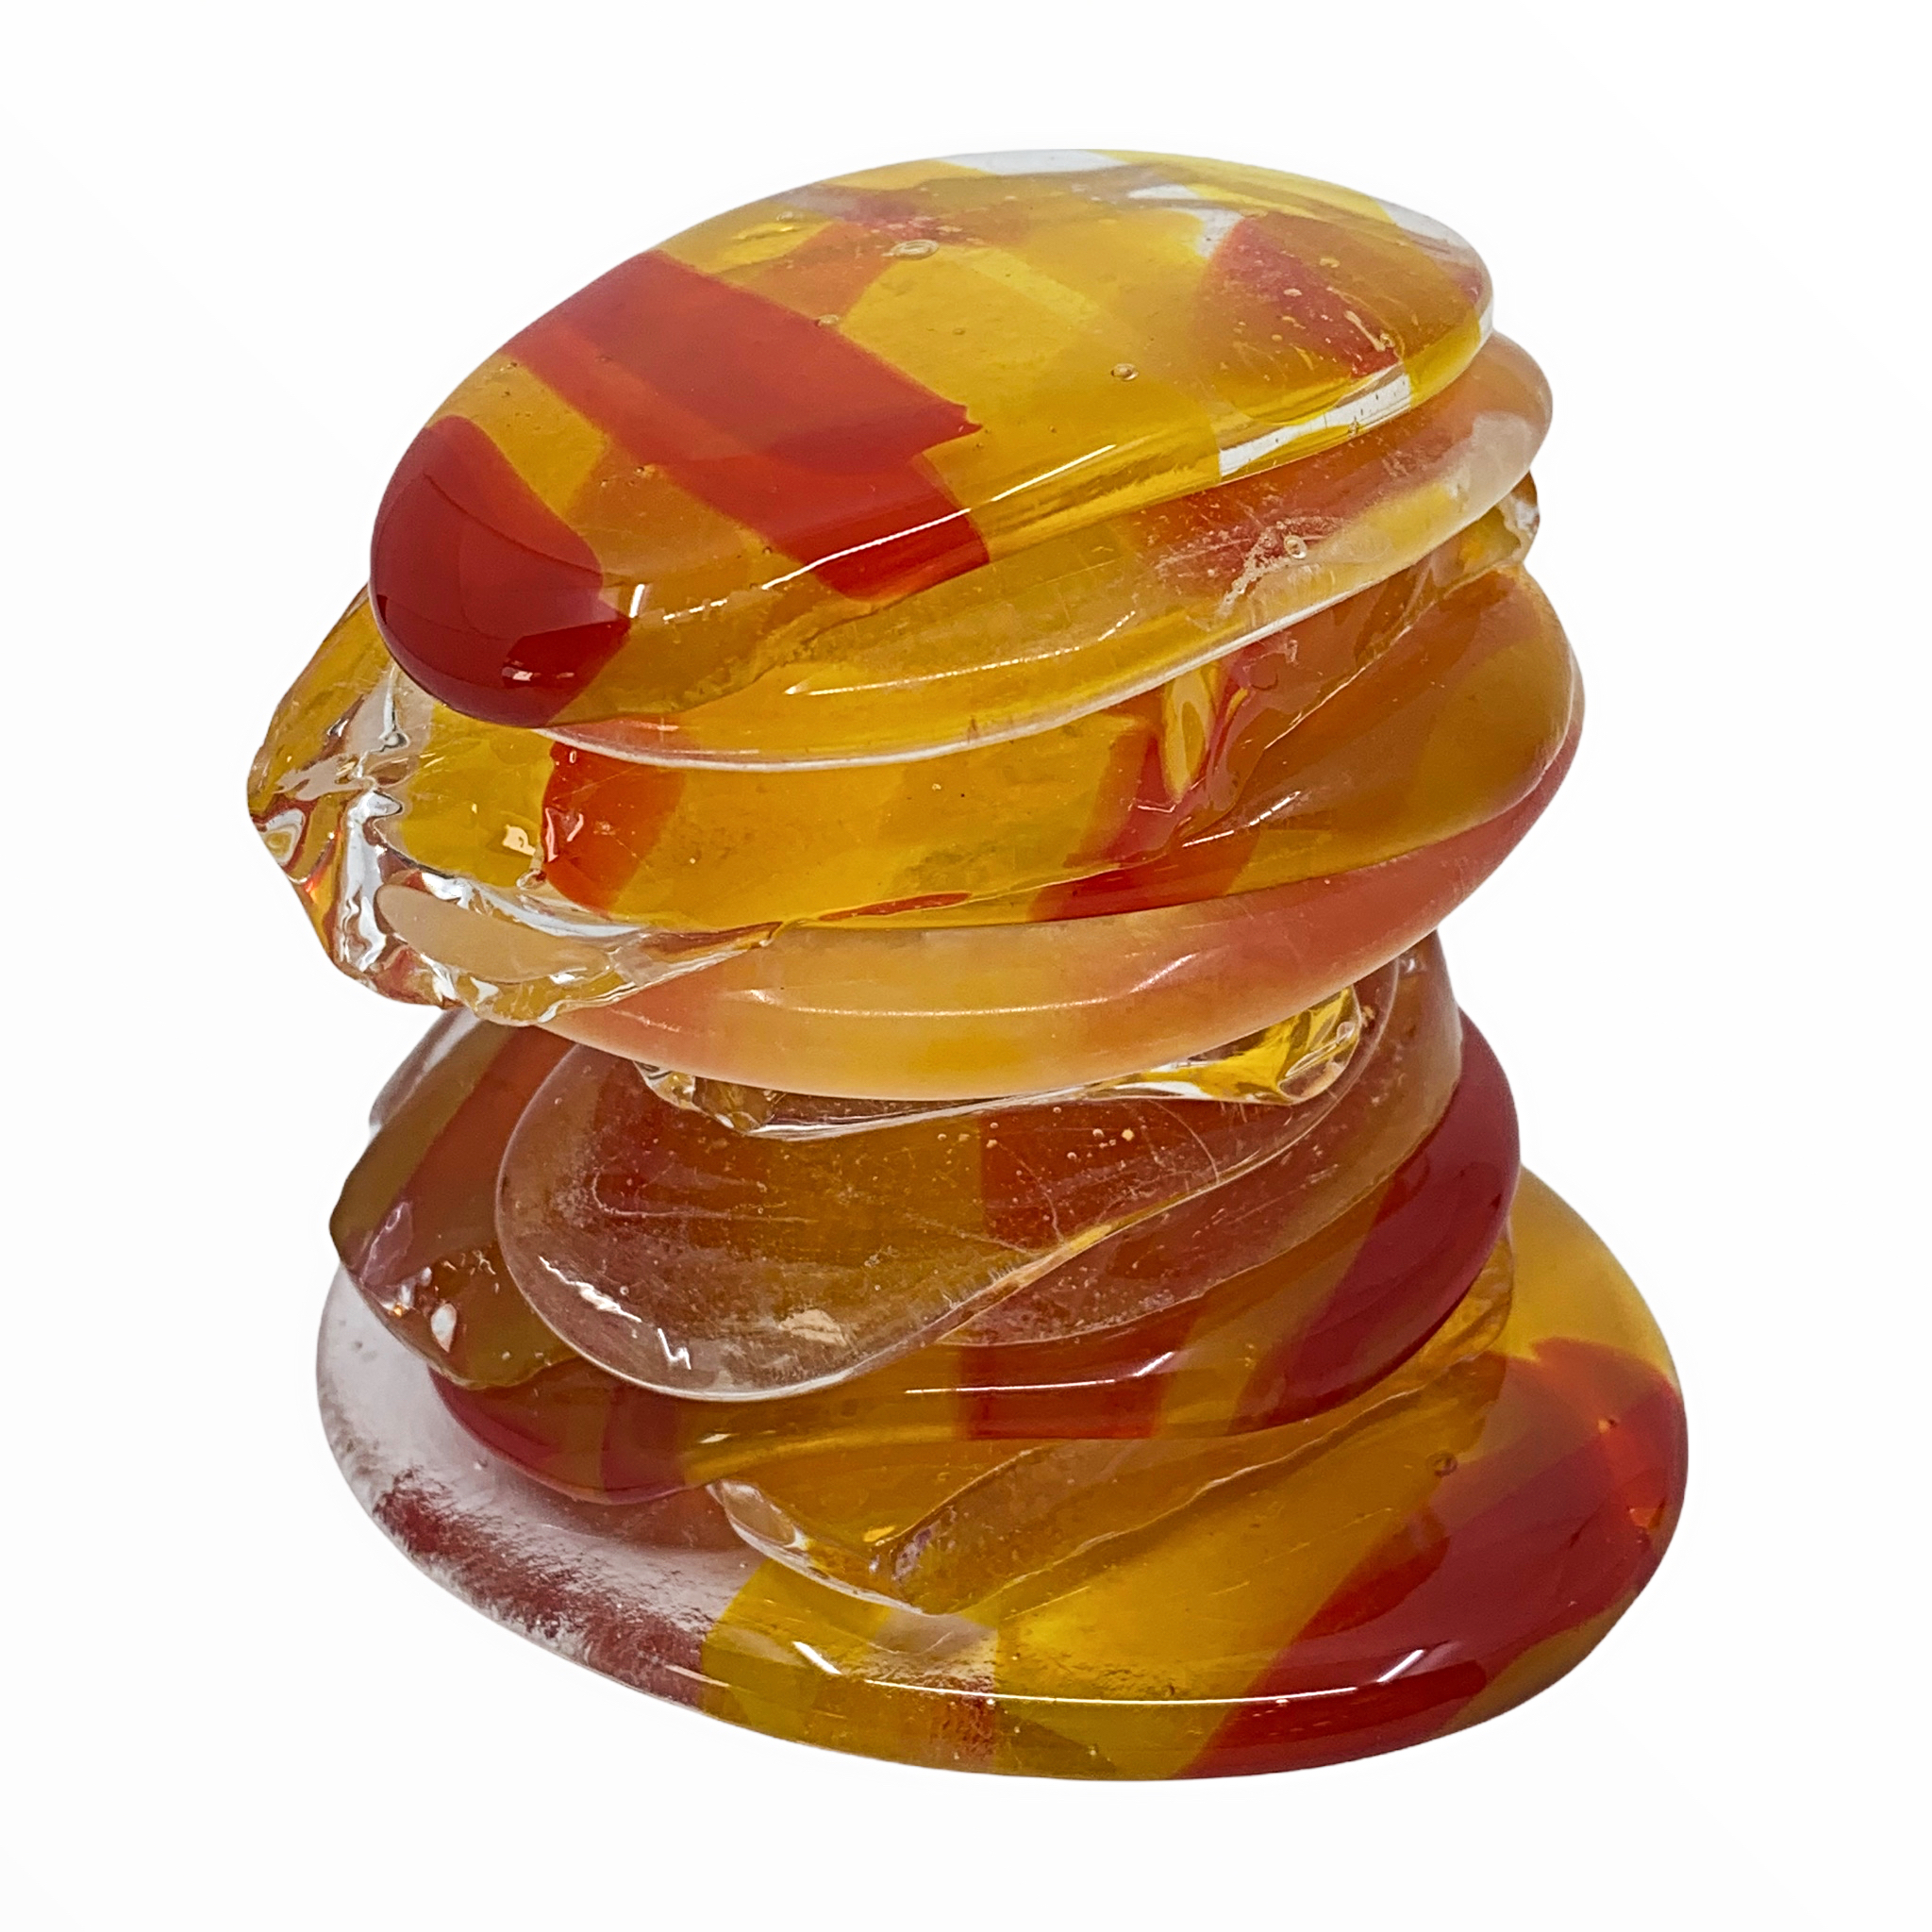 One of a kind cast glass cairn sculpture by Heather Cuell | Effusion Art Gallery + Cast Glass Studio, Invermere BC